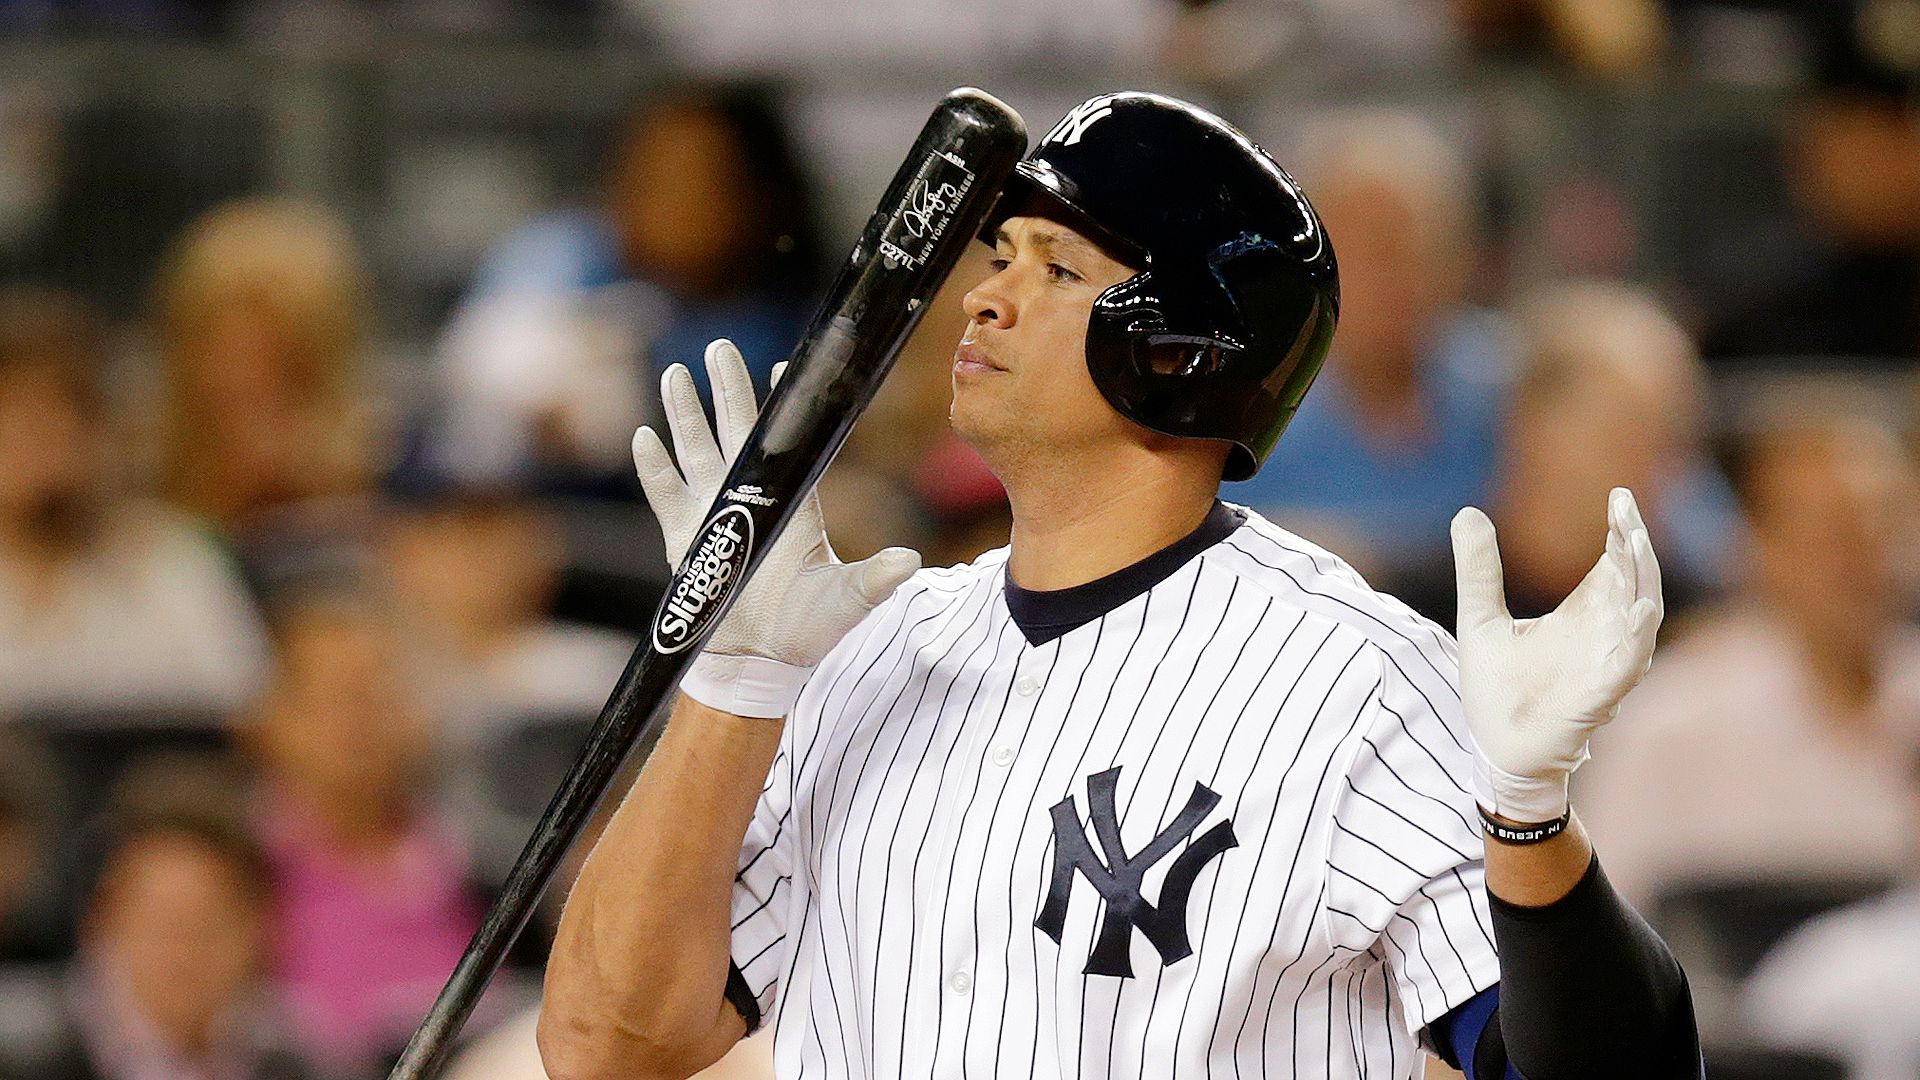 Yankees' Alex Rodriguez Said to Test Positive in 2003 - The New York Times